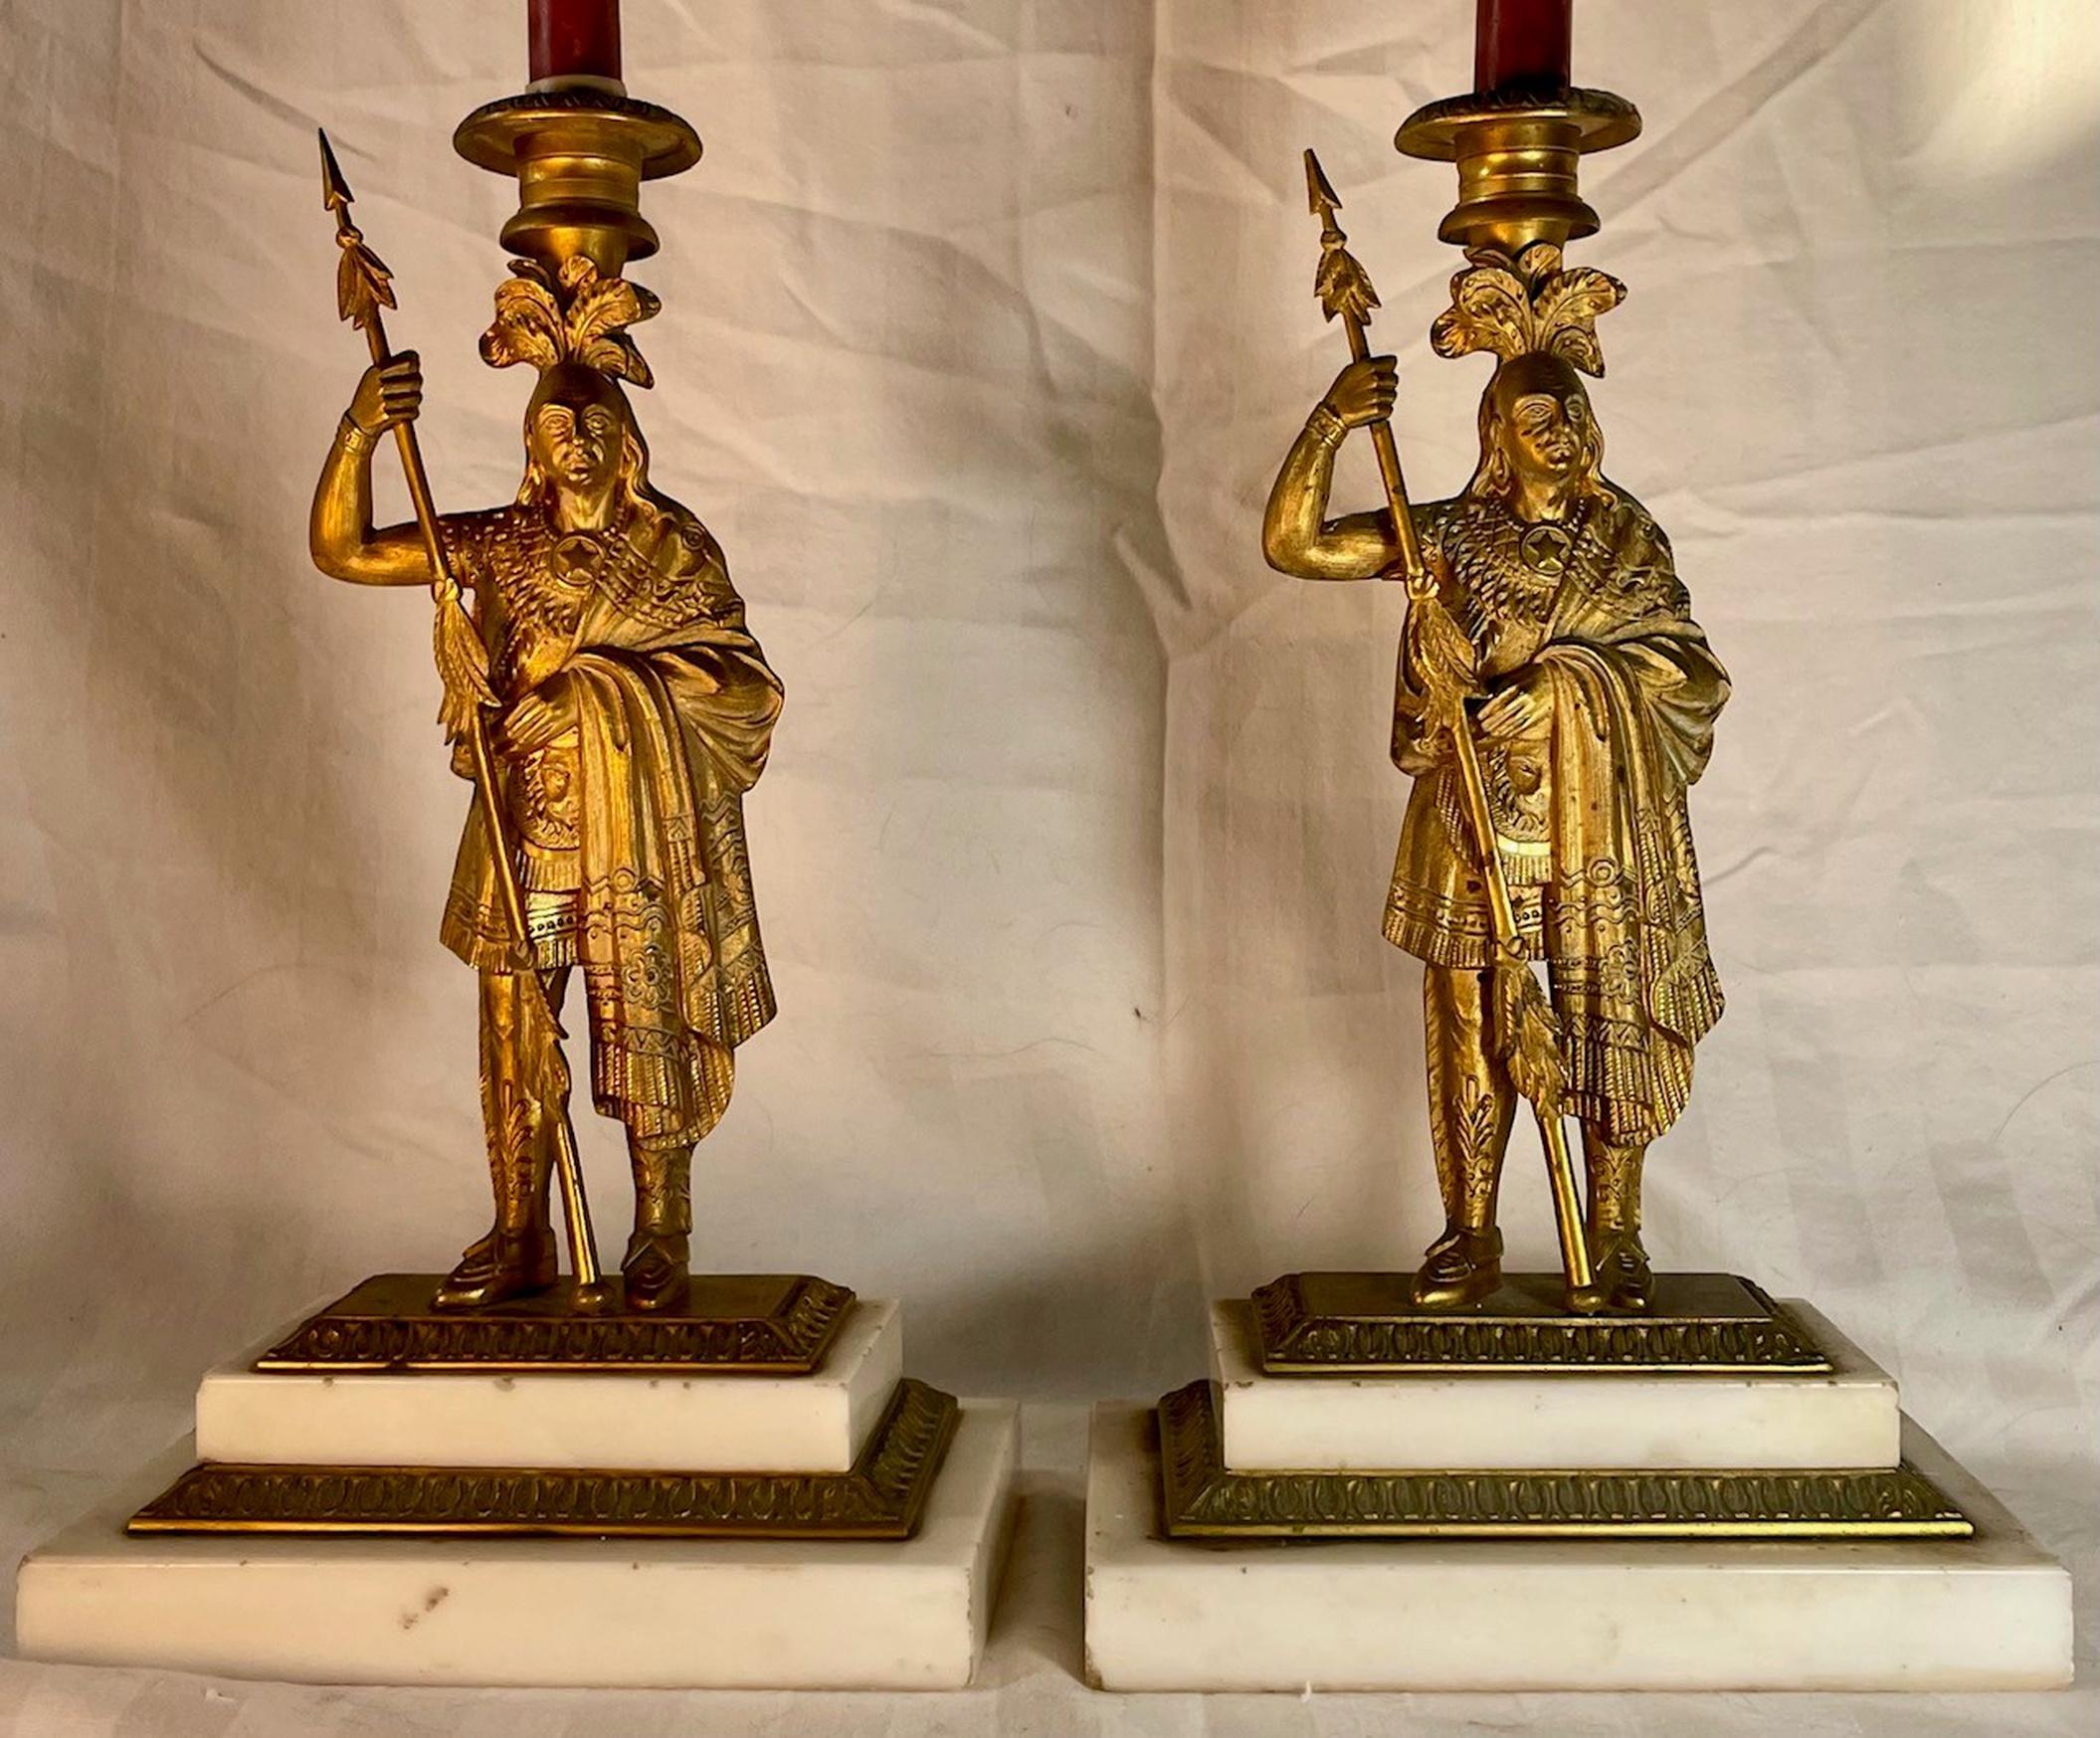 Pair of 19th century Victorian bronze and Ormolu figural candlesticks. 

Period Victorian deeply embossed bronze and ormolu candlesticks. This pair of the most beautiful and elegant English candleholders features an early impression of American